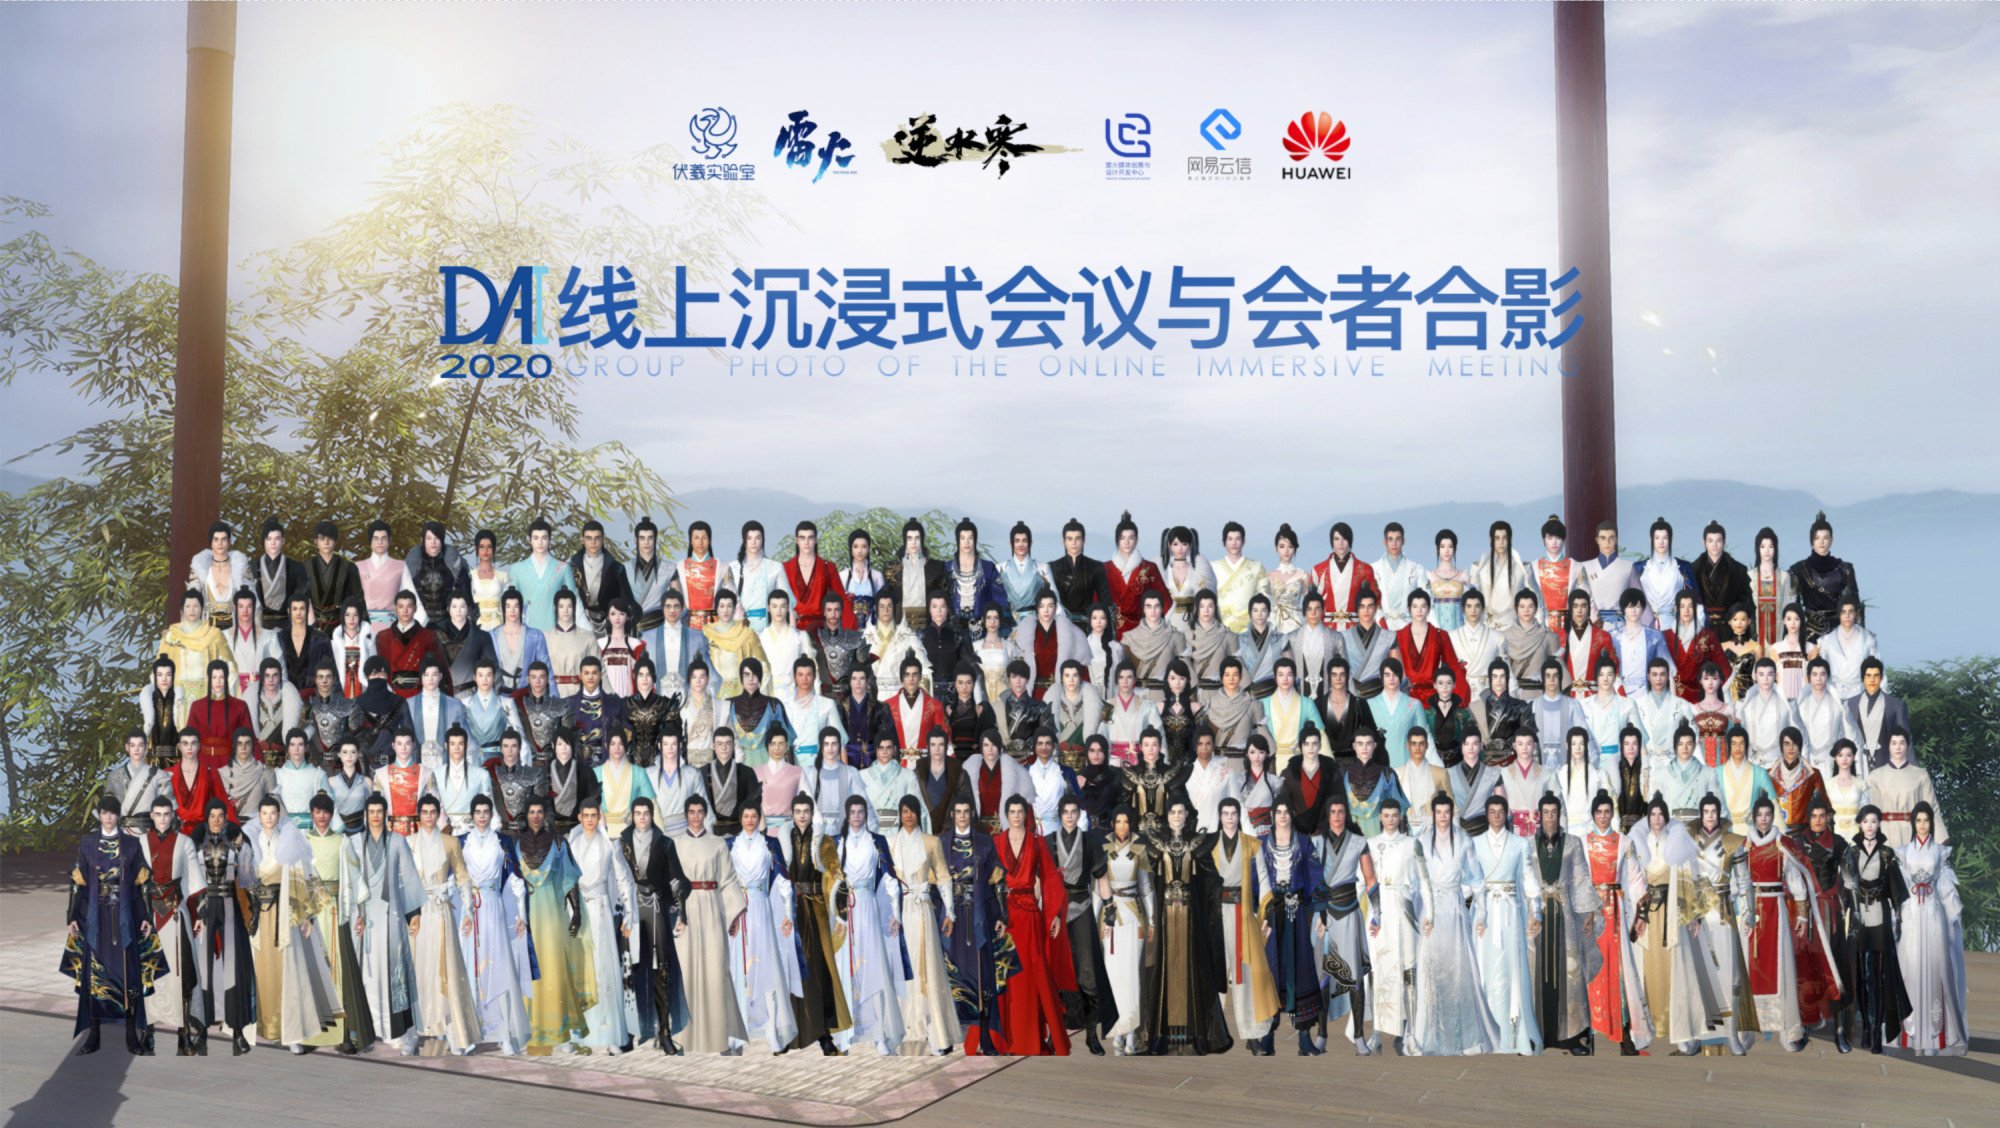 A group of academics from Nanjing University conducted a meeting in 2020 using NetEase’s virtual conference platform Yaotai, which enabled their avatars to appear wearing ancient Chinese garments. Photo: Handout